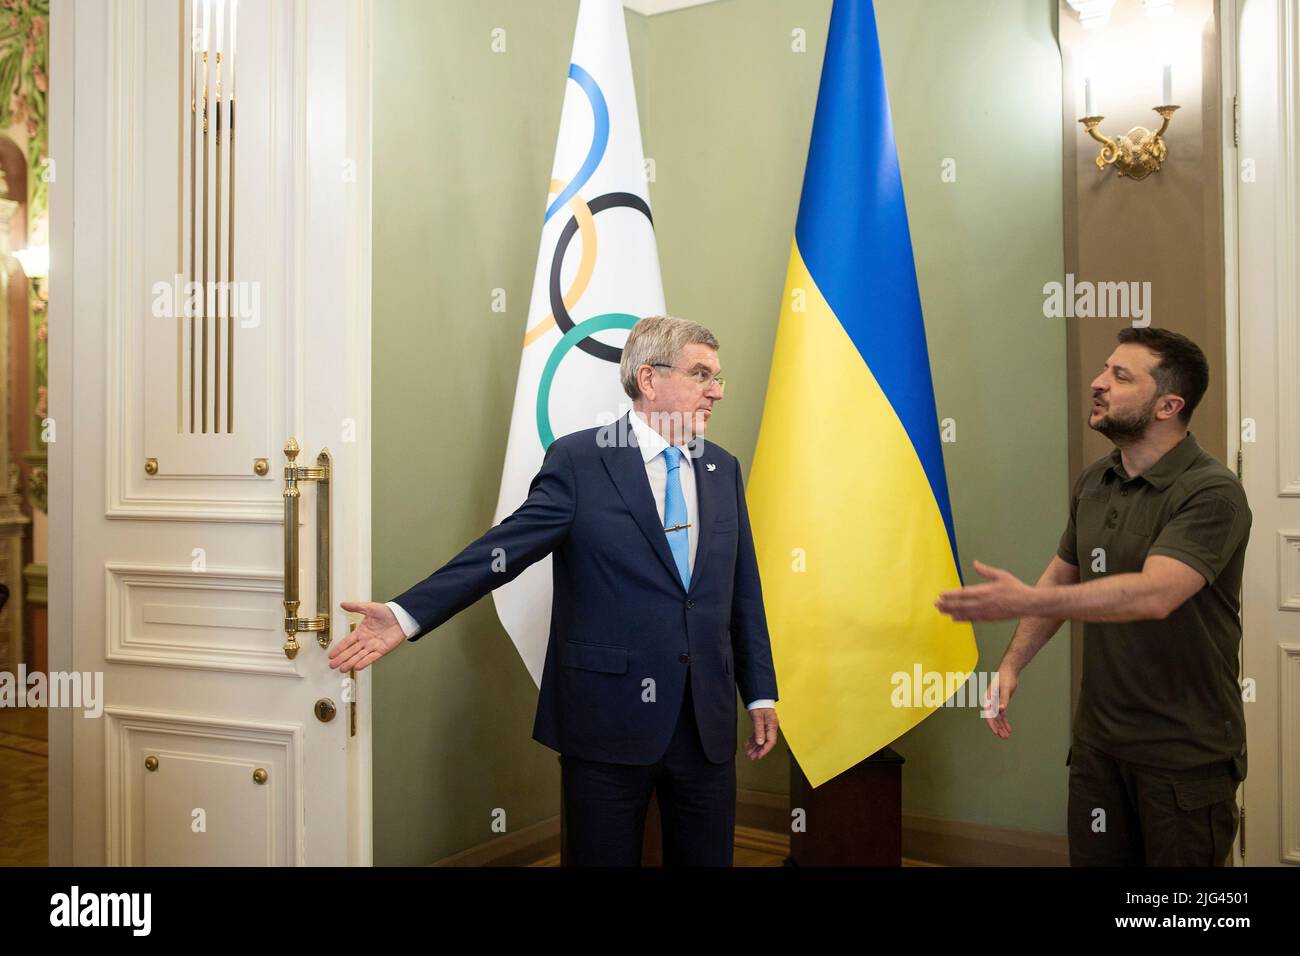 Kyiv, Ukraine. 03 July, 2022. International Olympic Committee President Thomas Bach, left, invites Ukrainian President Volodymyr Zelenskyy, to enter the room first during his visit to the Mariinskyi Palace, July 3, 2022 in Kyiv, Ukraine.  Credit: Ukraine Presidency/Ukrainian Presidential Press Office/Alamy Live News Stock Photo